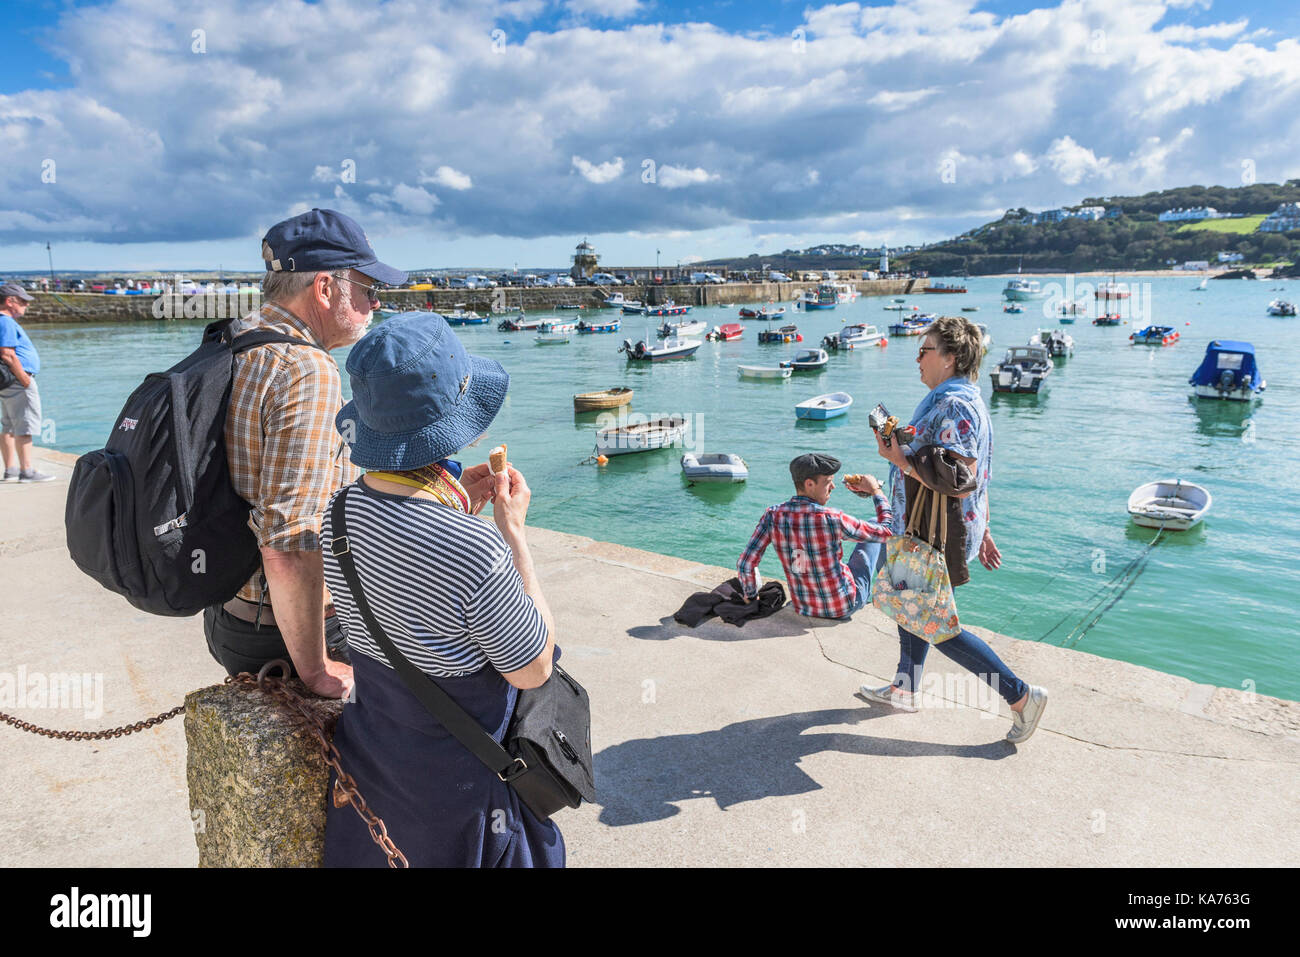 St Ives - holidaymakers relaxing and enjoying the view over St Ives Harbour in Cornwall. Stock Photo